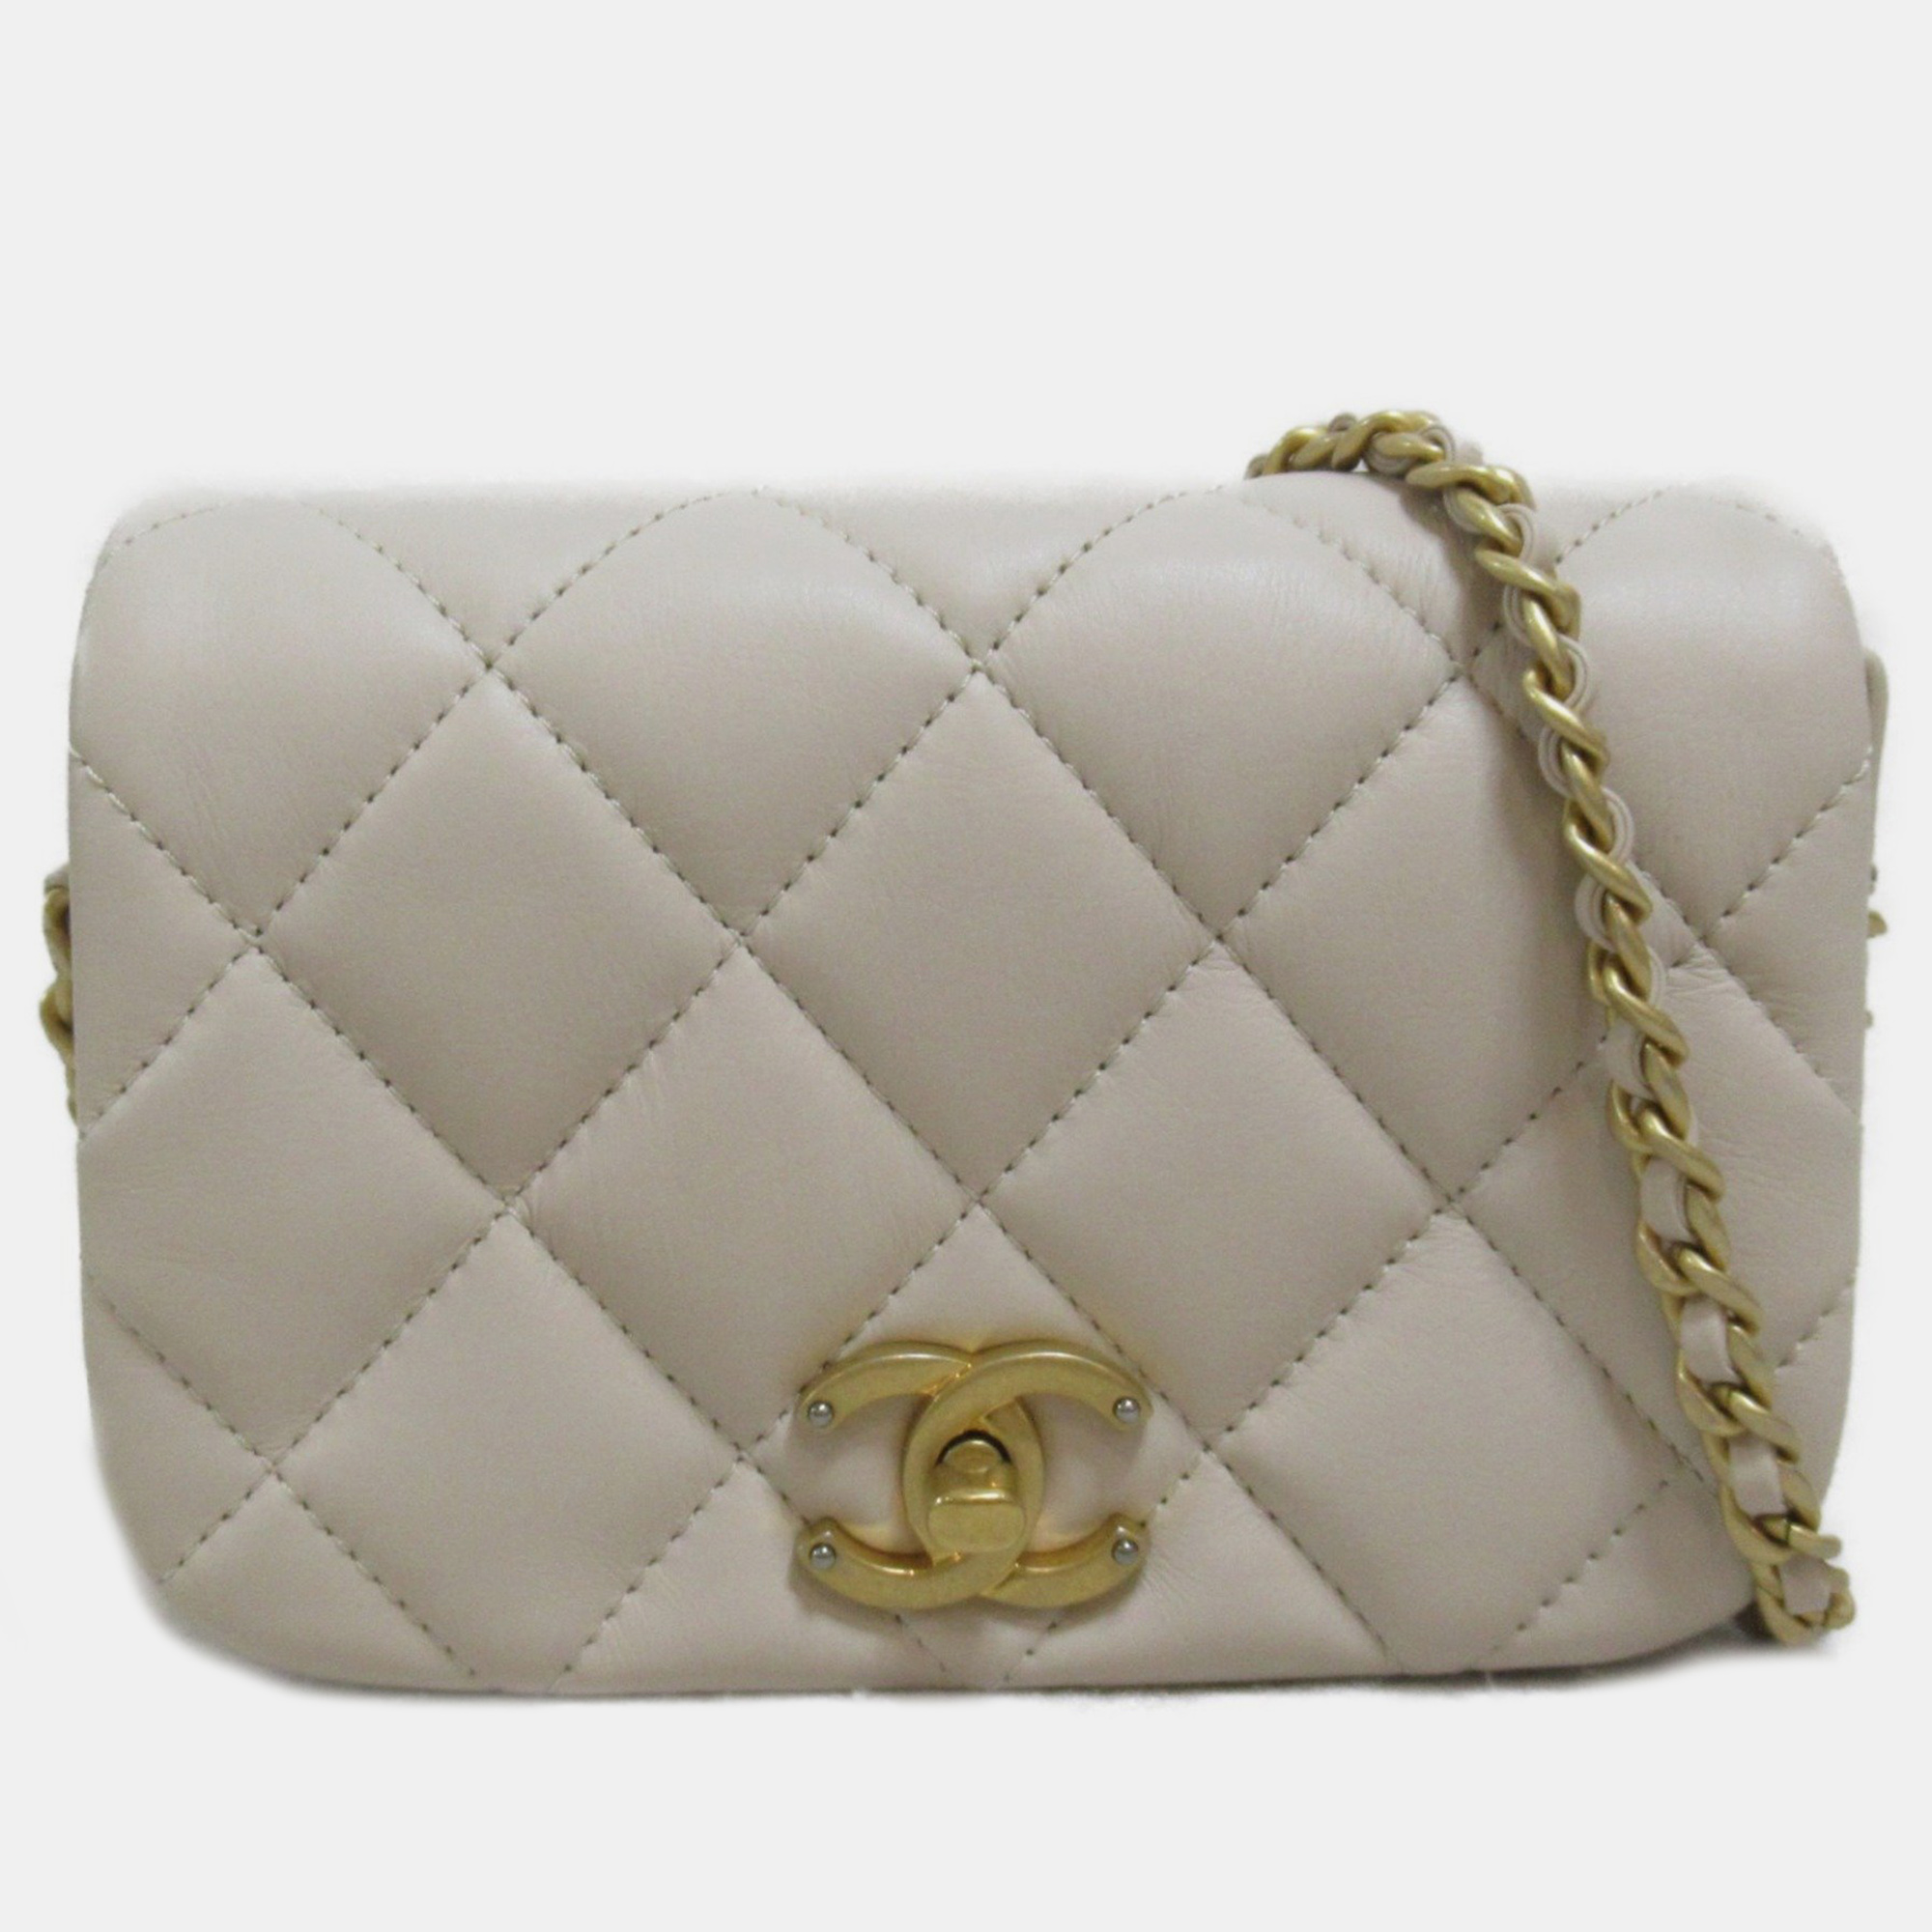 Chanel quilted calfskin mini nailed cc full flap bag